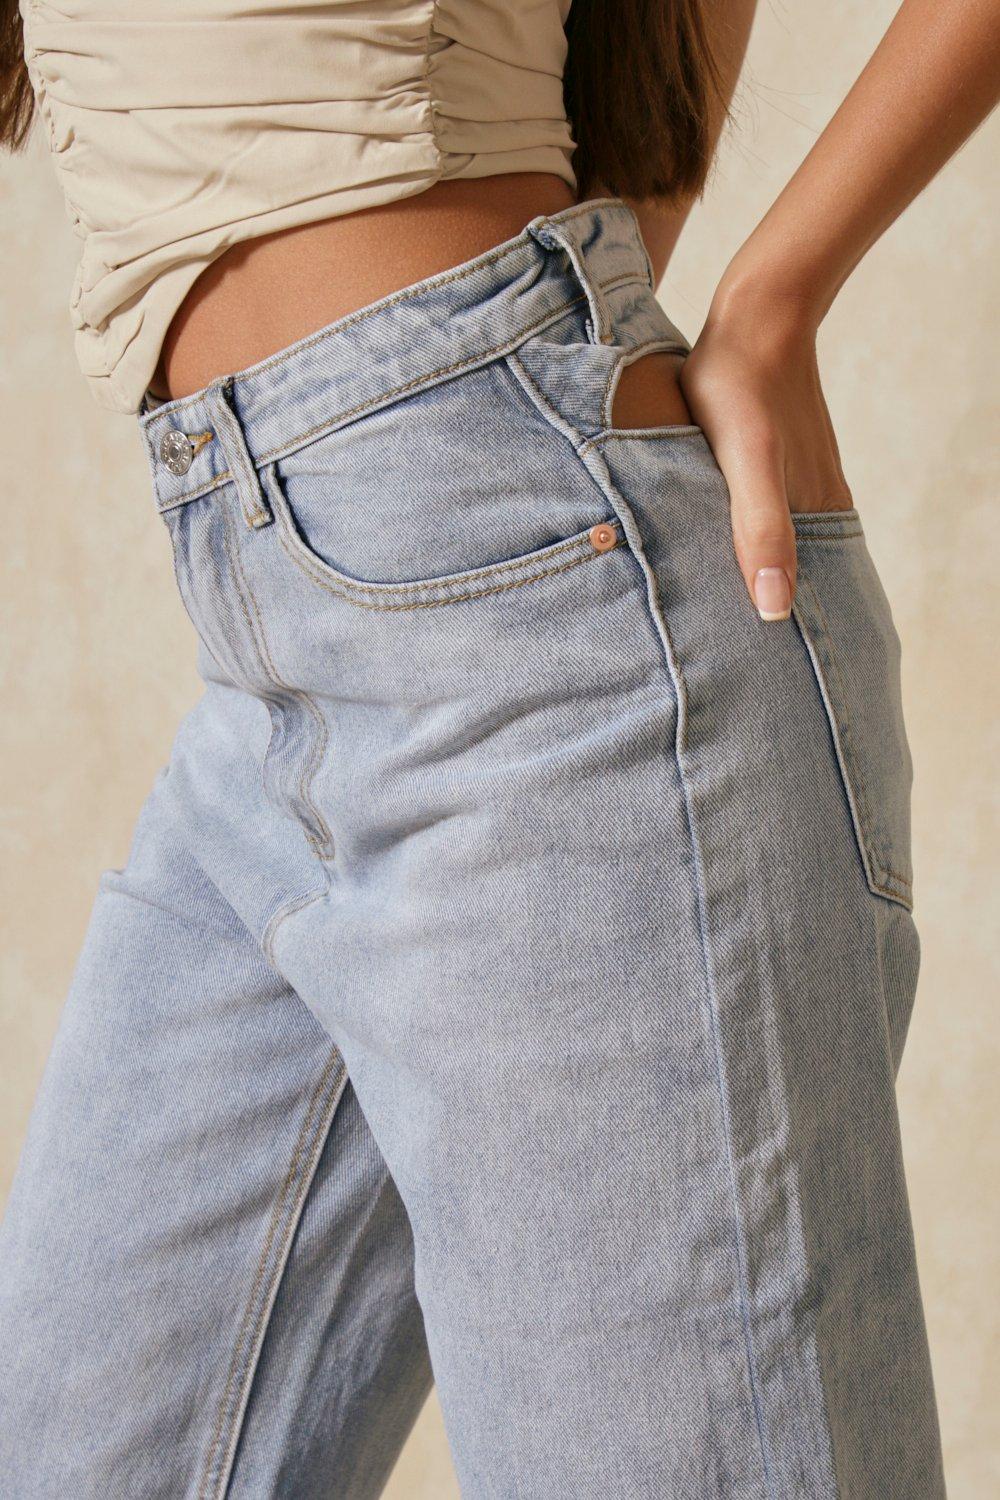 Thong Cut Out Detail Distressed Straight Leg Jeans